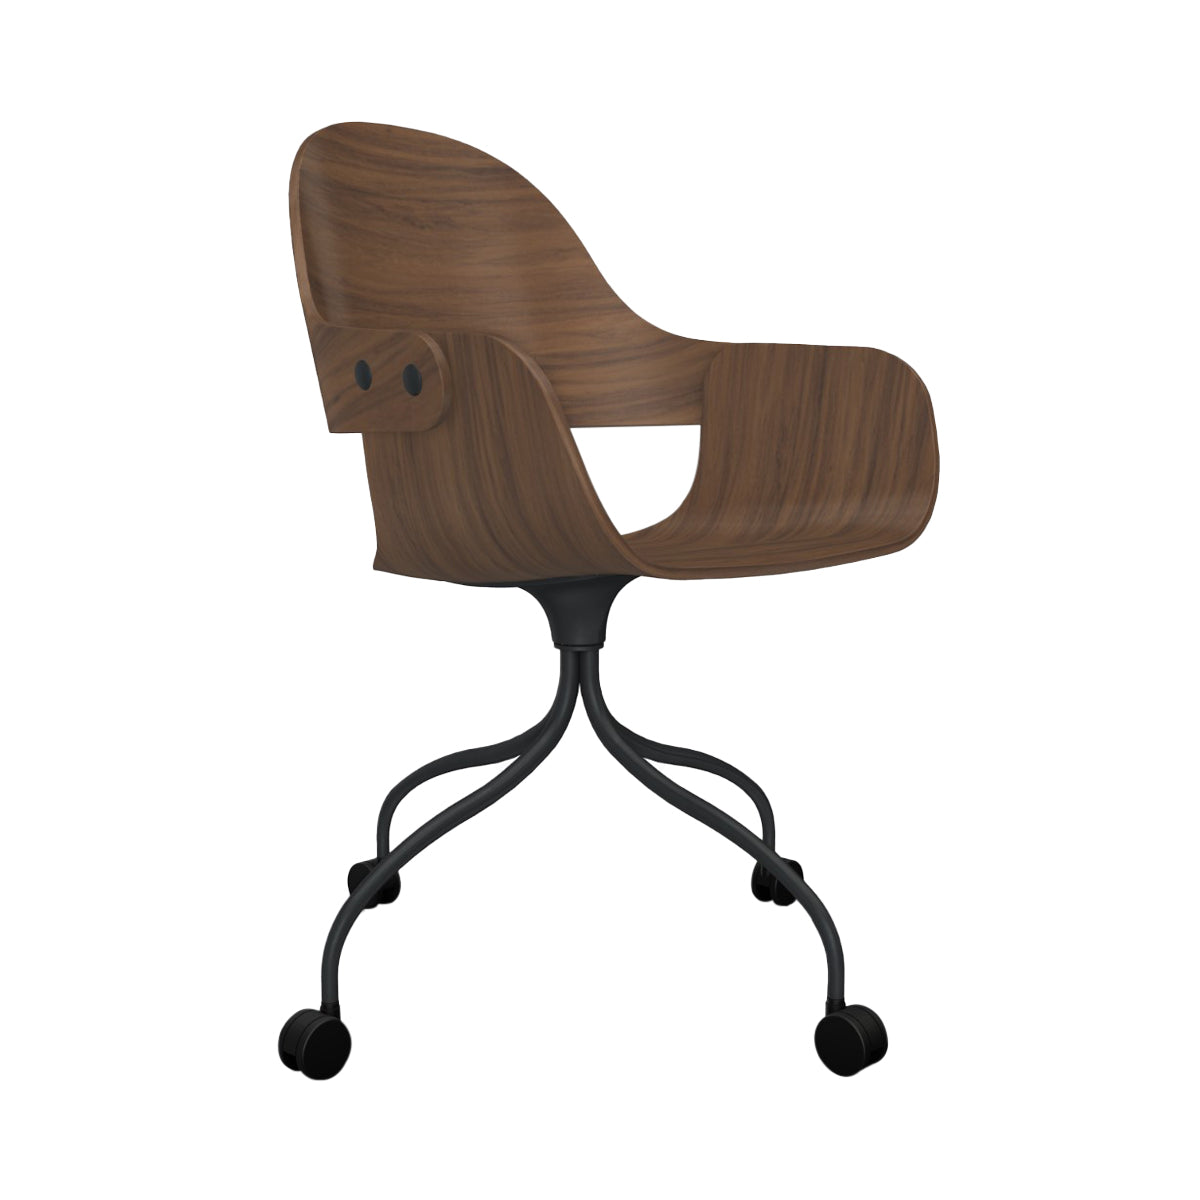 Showtime Nude Chair with Wheel: Walnut + Anthracite Grey